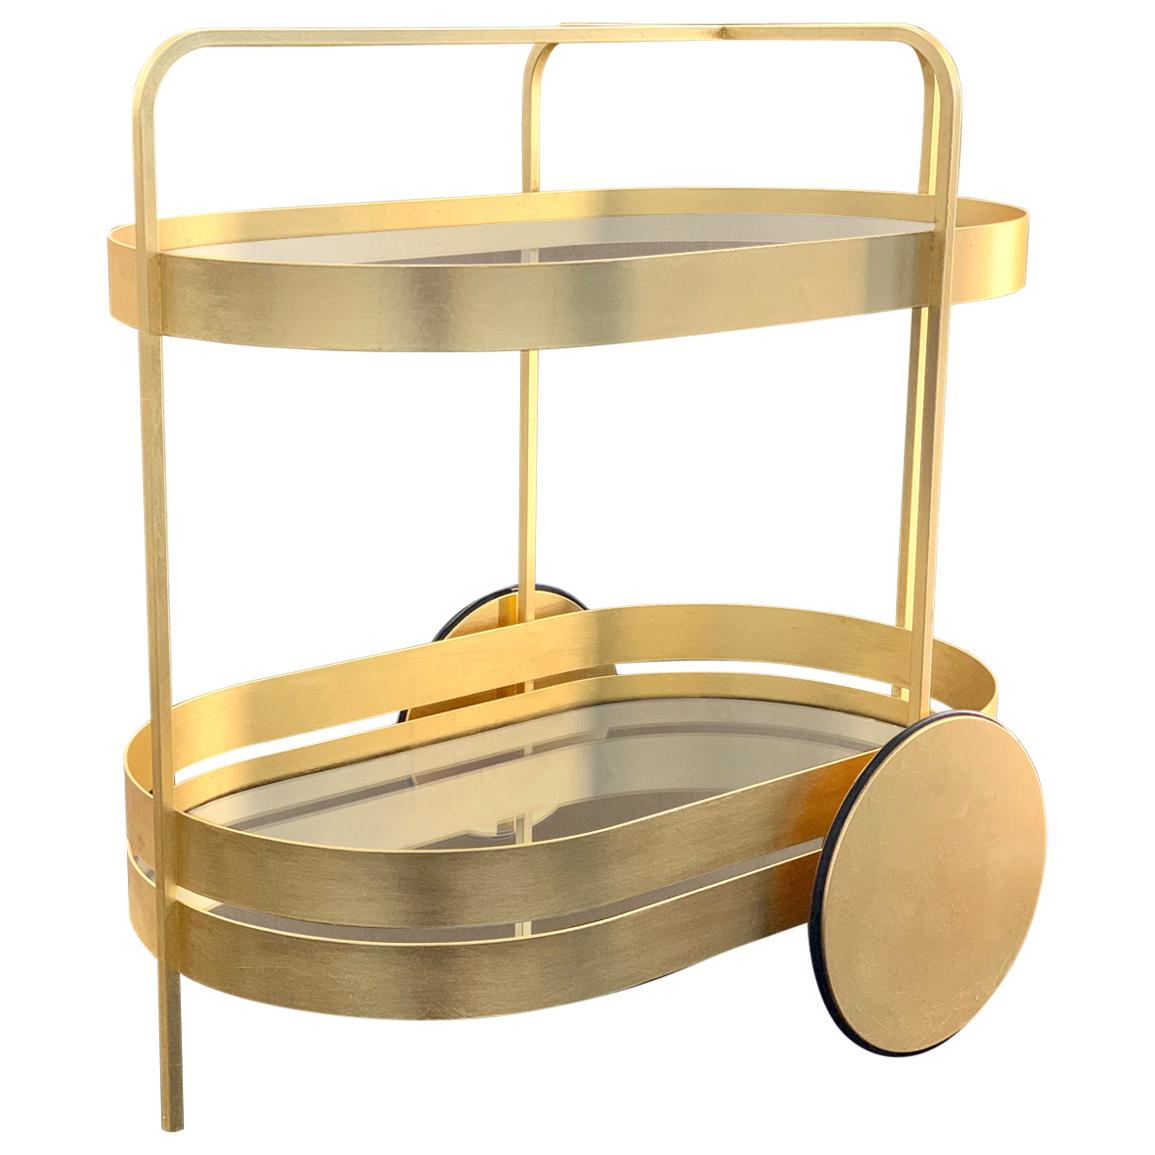 Limited Edition 1 of 50 Schonbuch Gold Grace Trolley by Sebastian Herkner